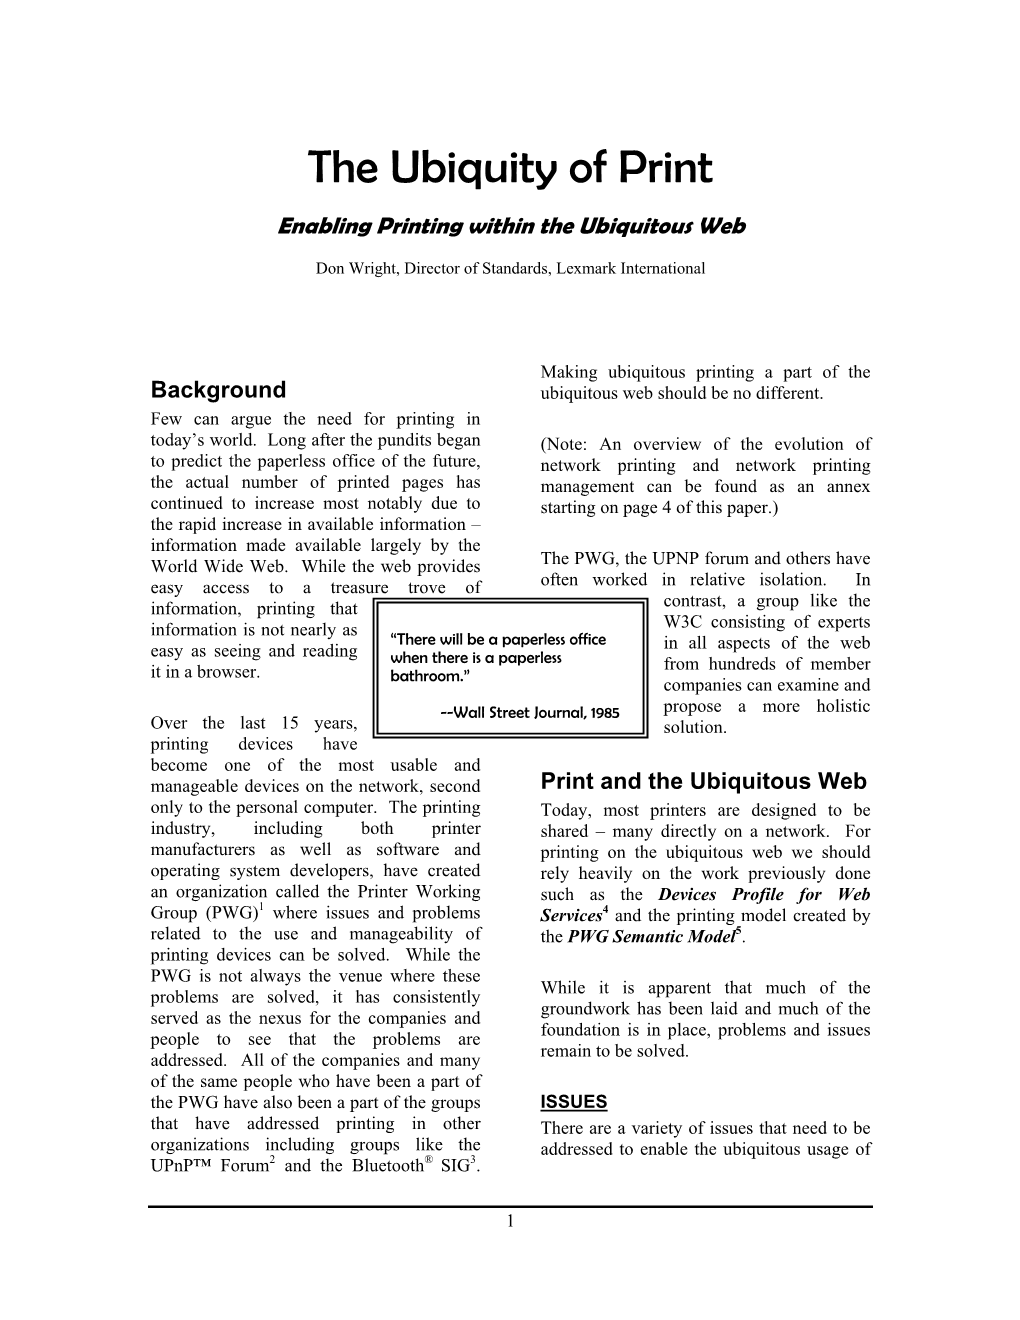 The Ubiquity of Print Enabling Printing Within the Ubiquitous Web